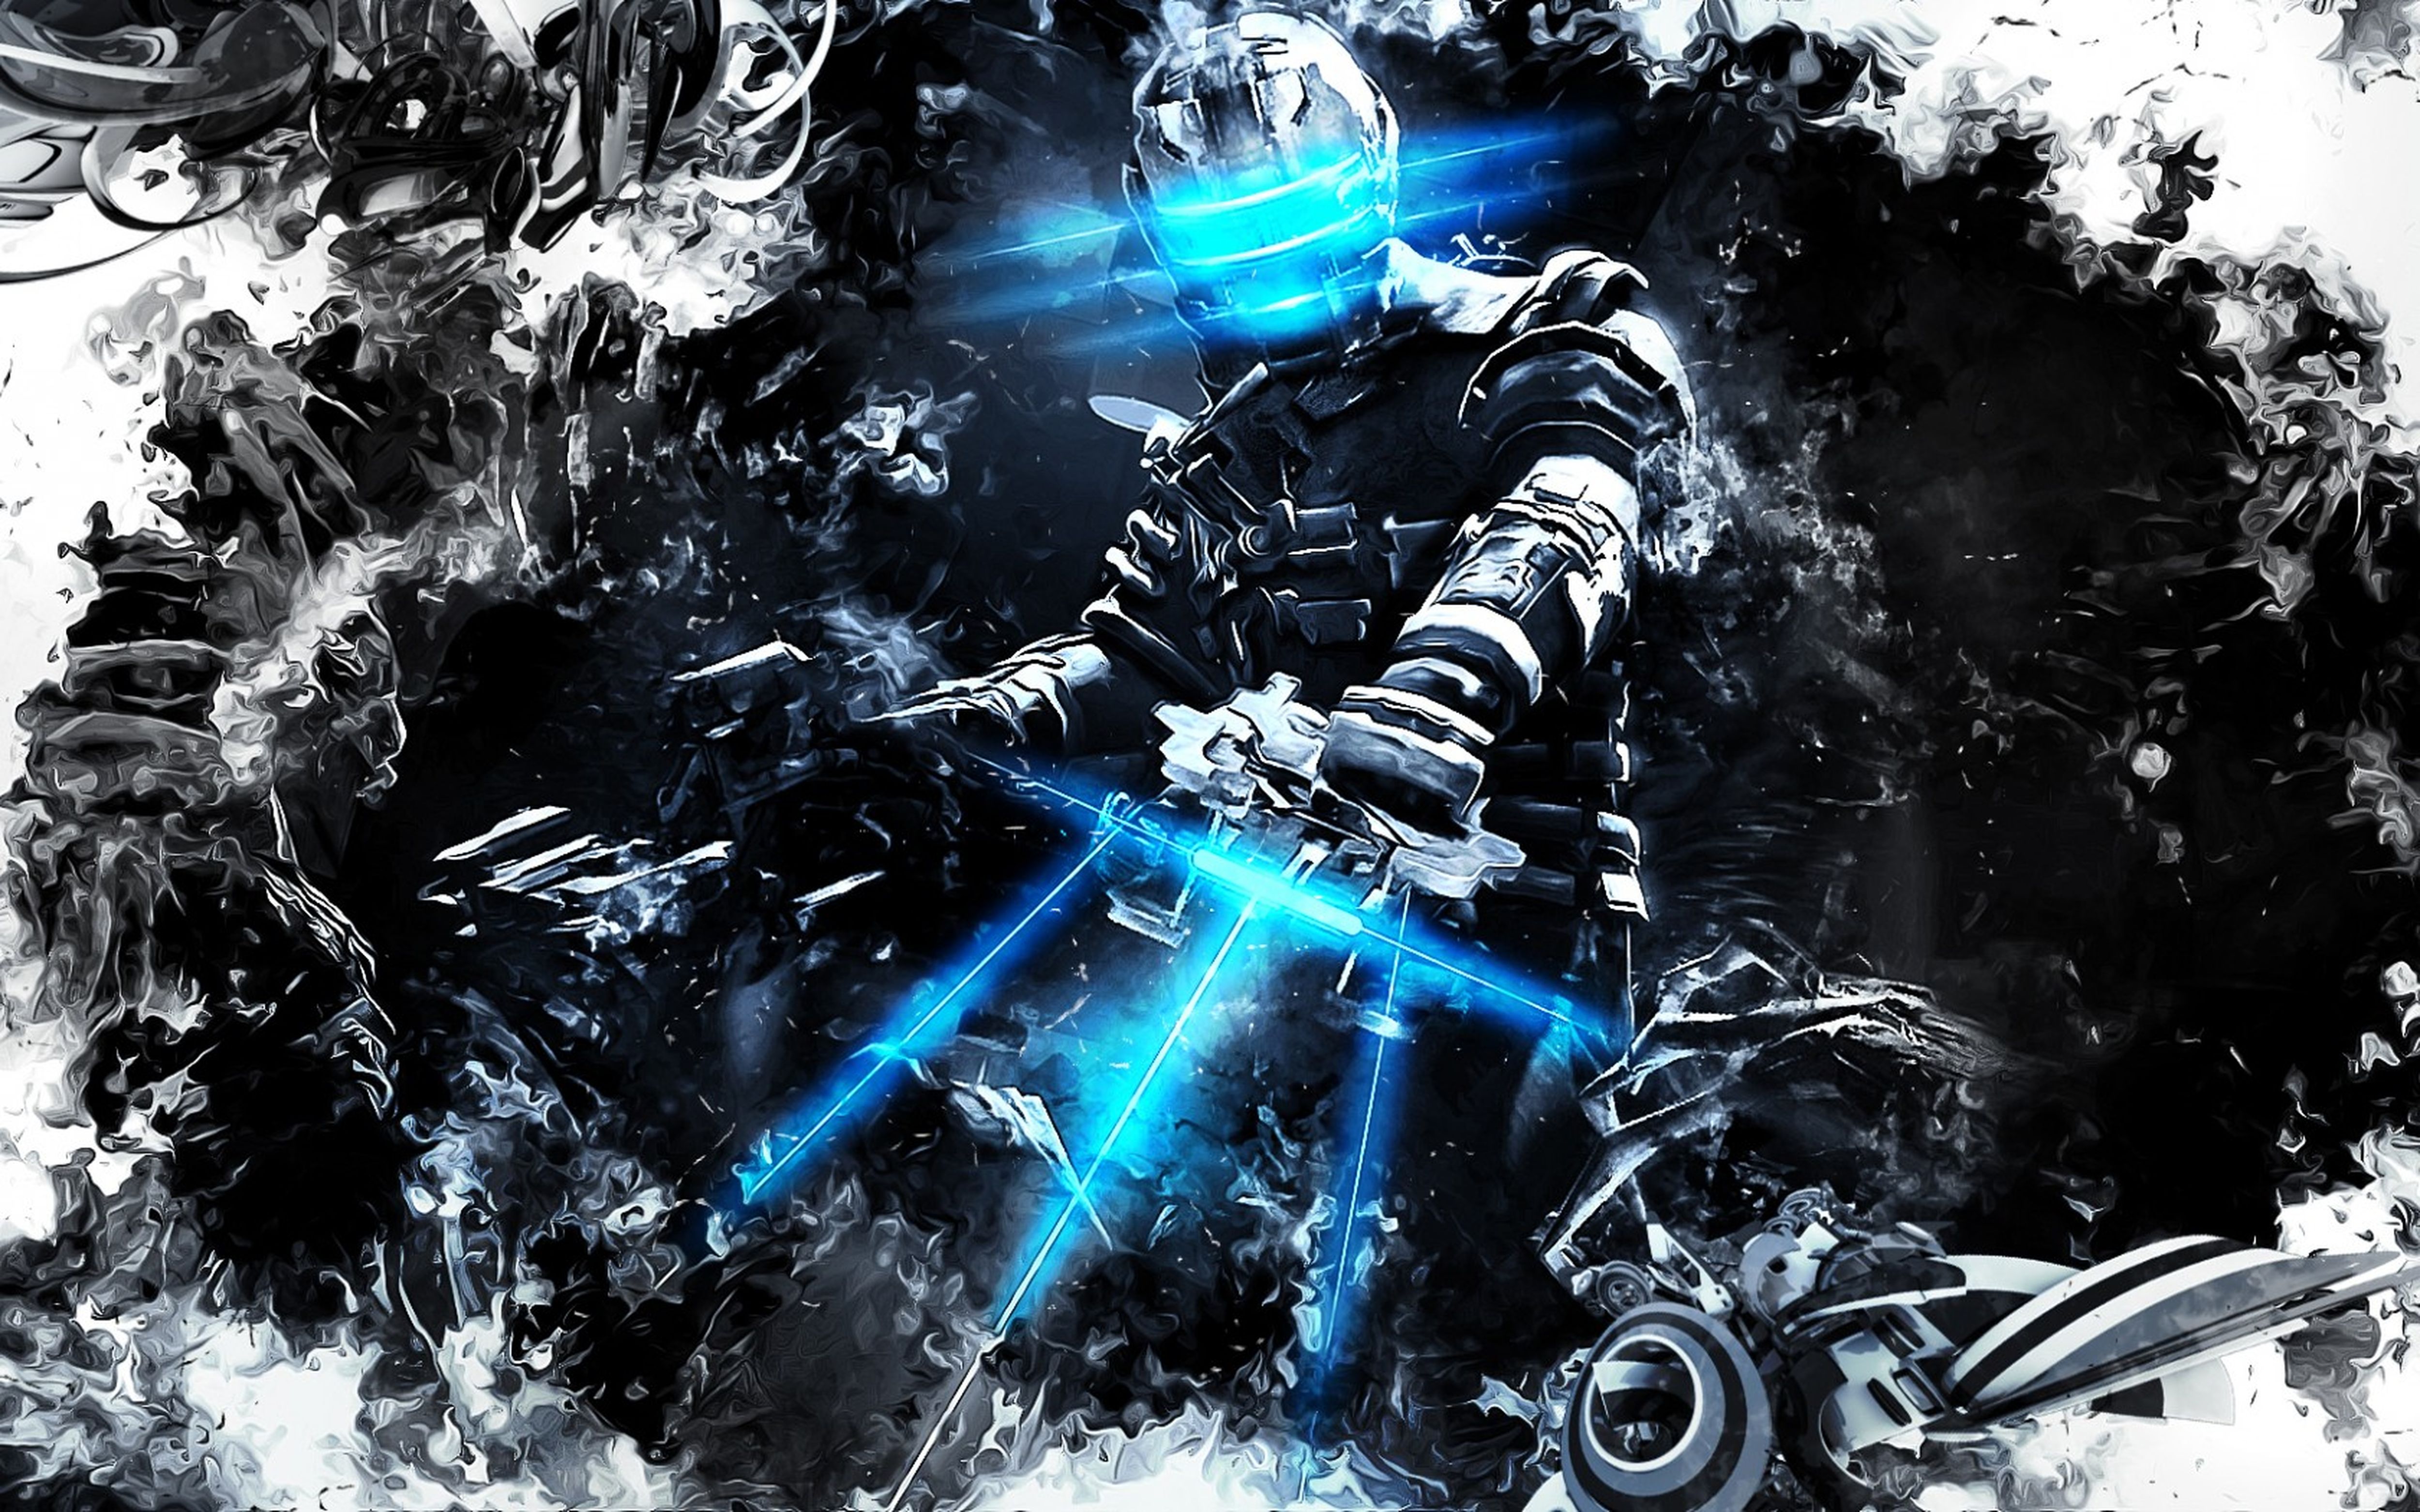 235 Dead Space HD Wallpapers | Backgrounds - Wallpaper Abyss